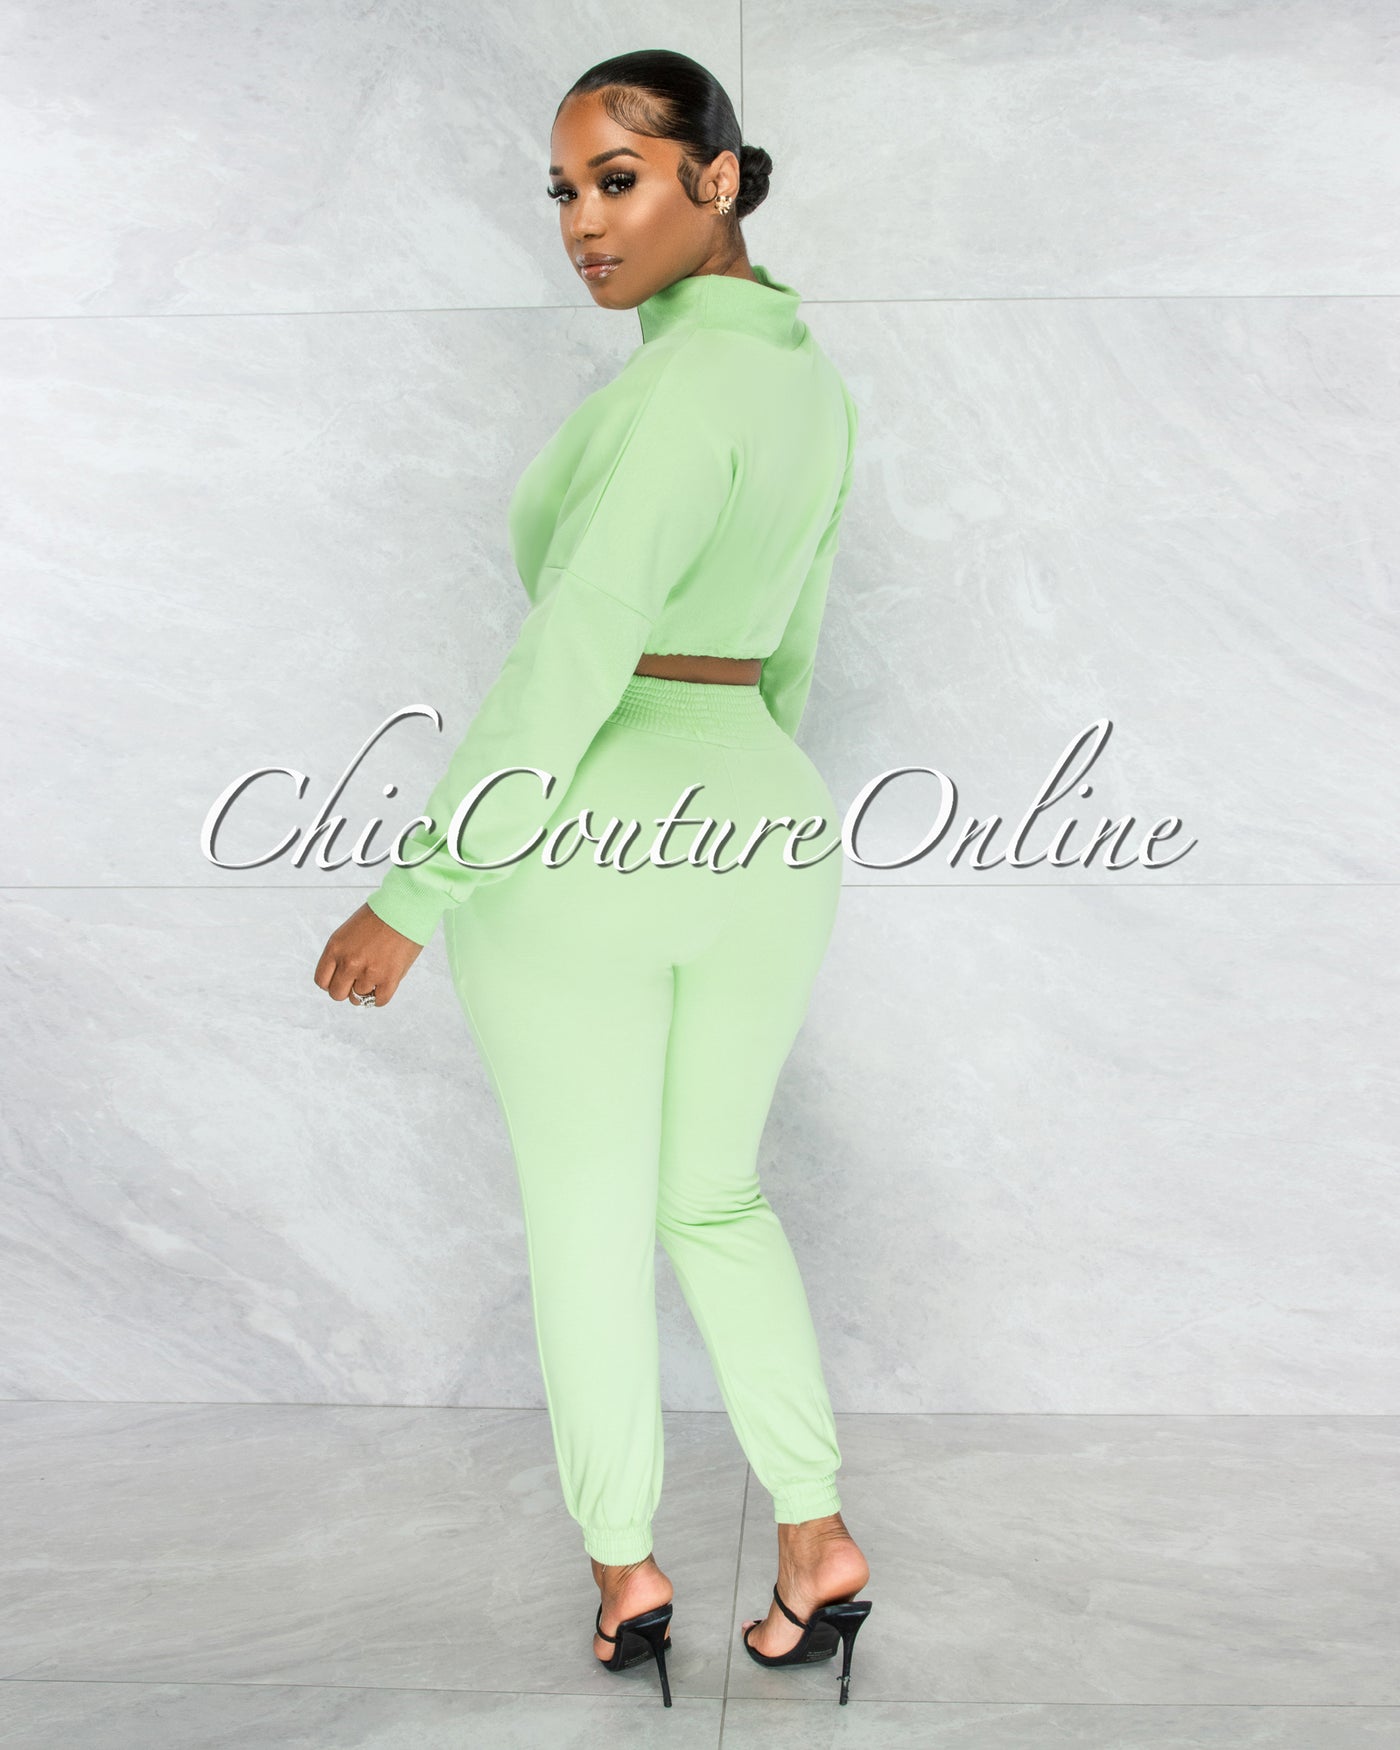 Balboa Baby Green Crop Sweater & Jogger Two Piece Set